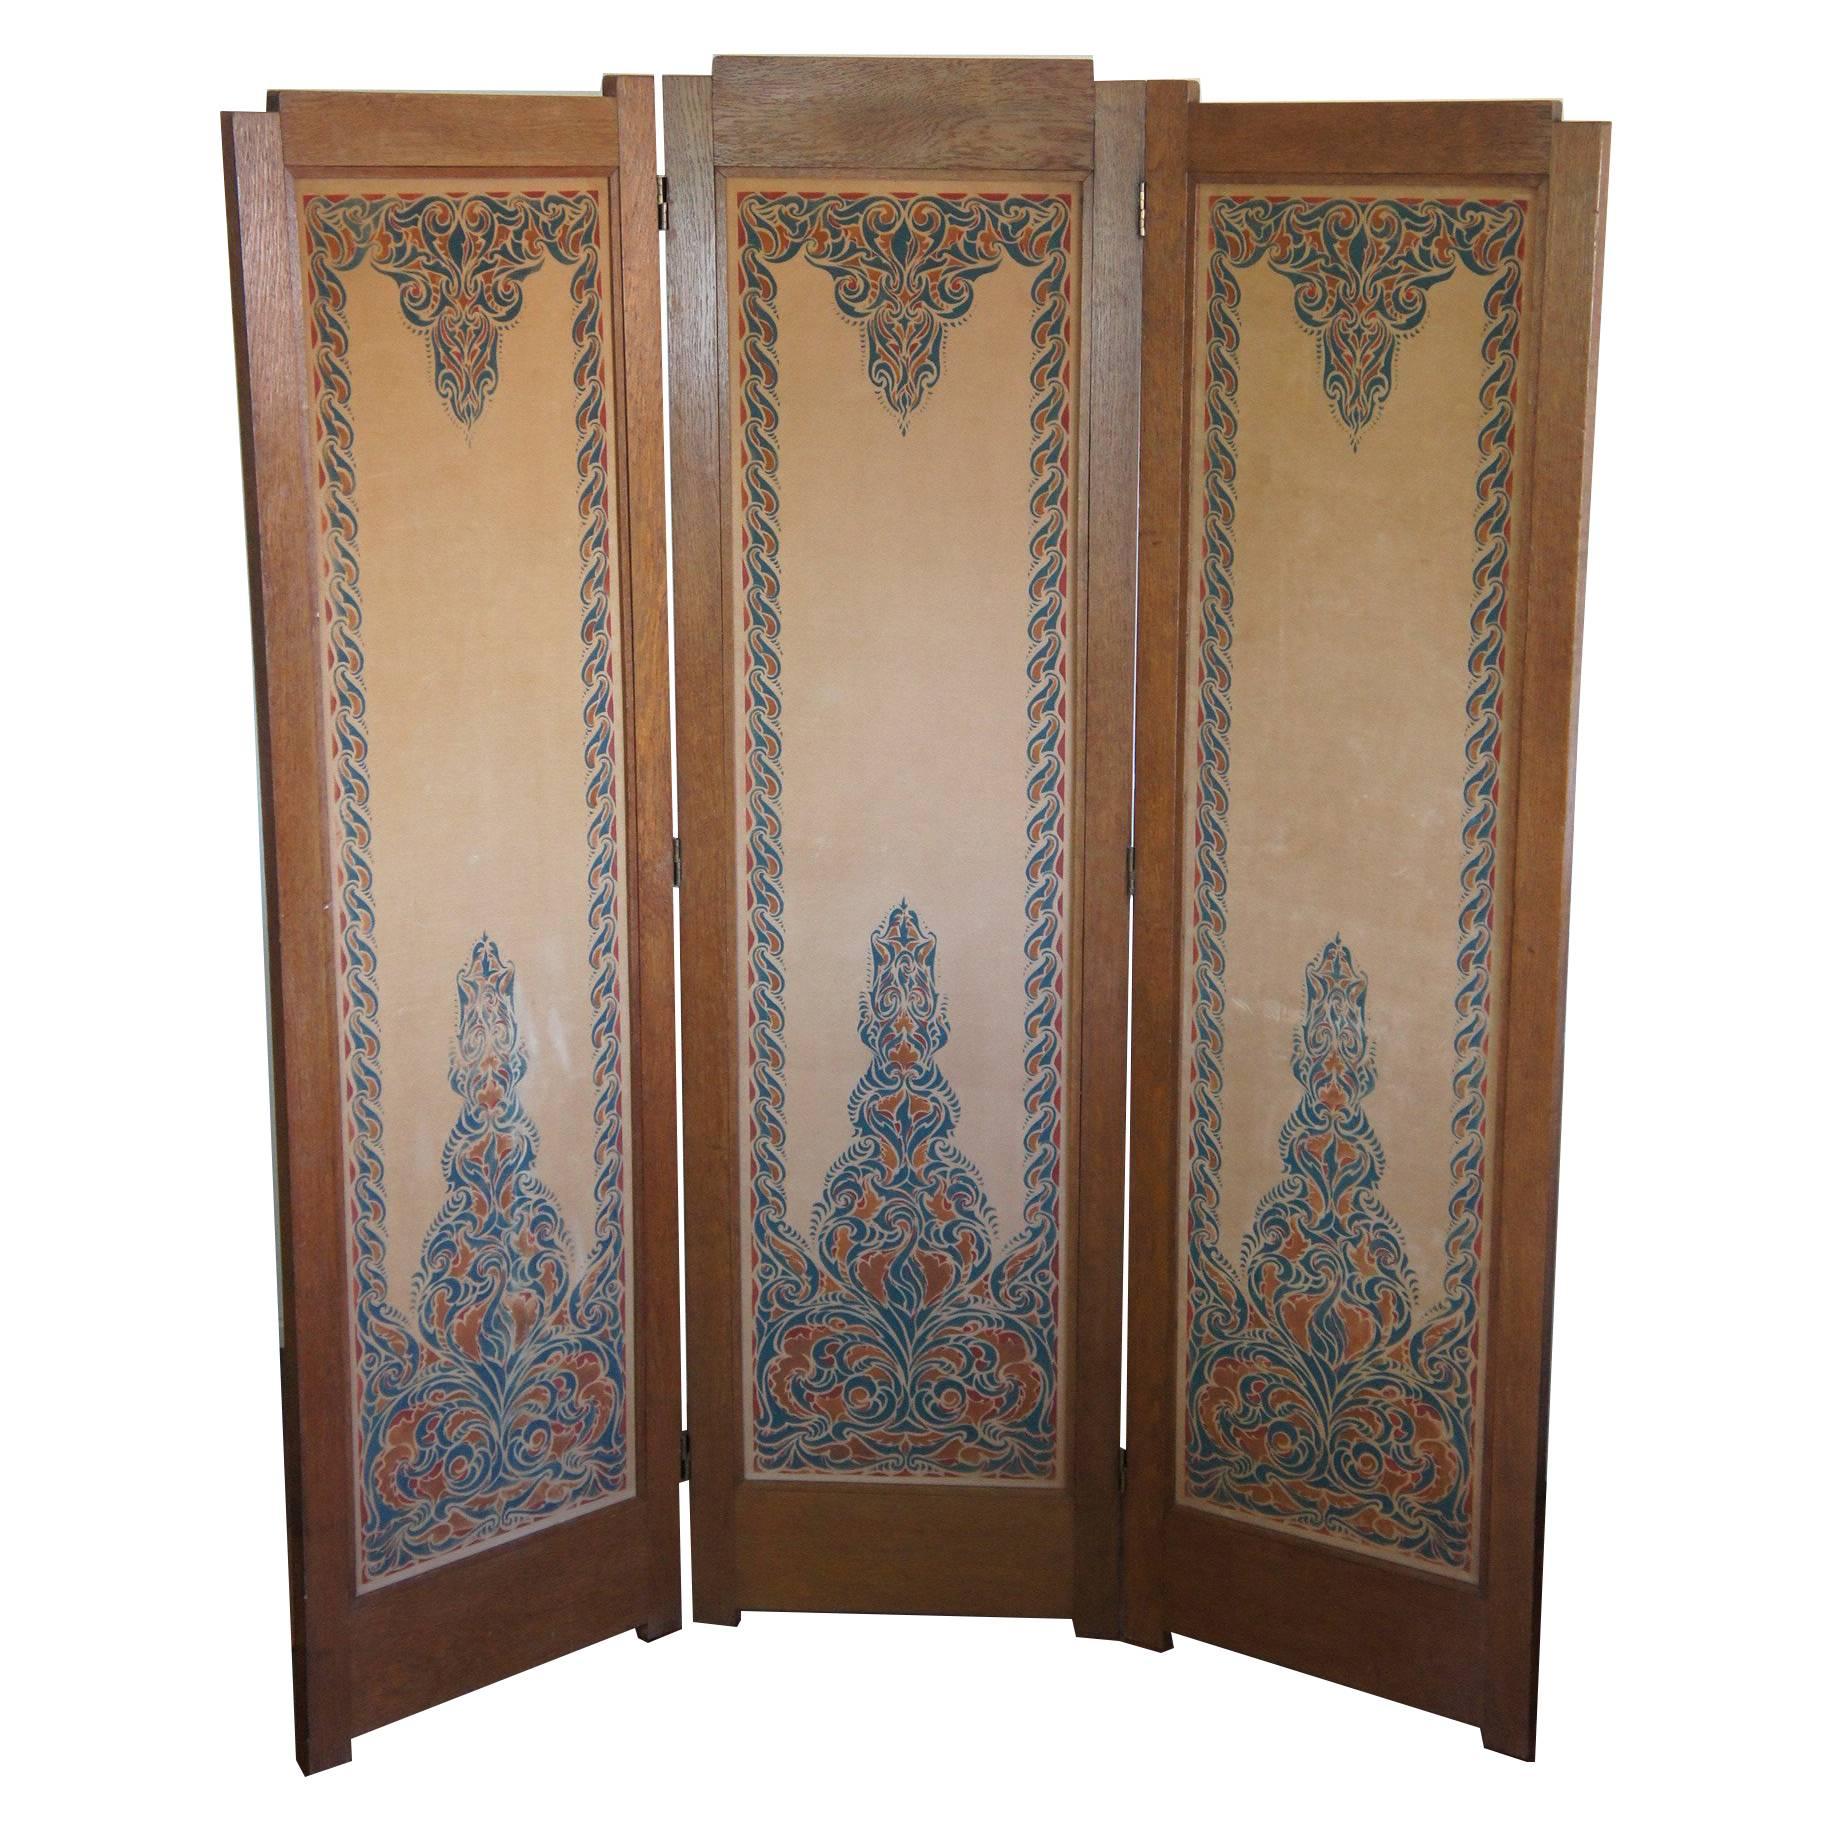 Dutch Arts and Crafts Folding Screen with Batik Printed Felt on Wooden Panels